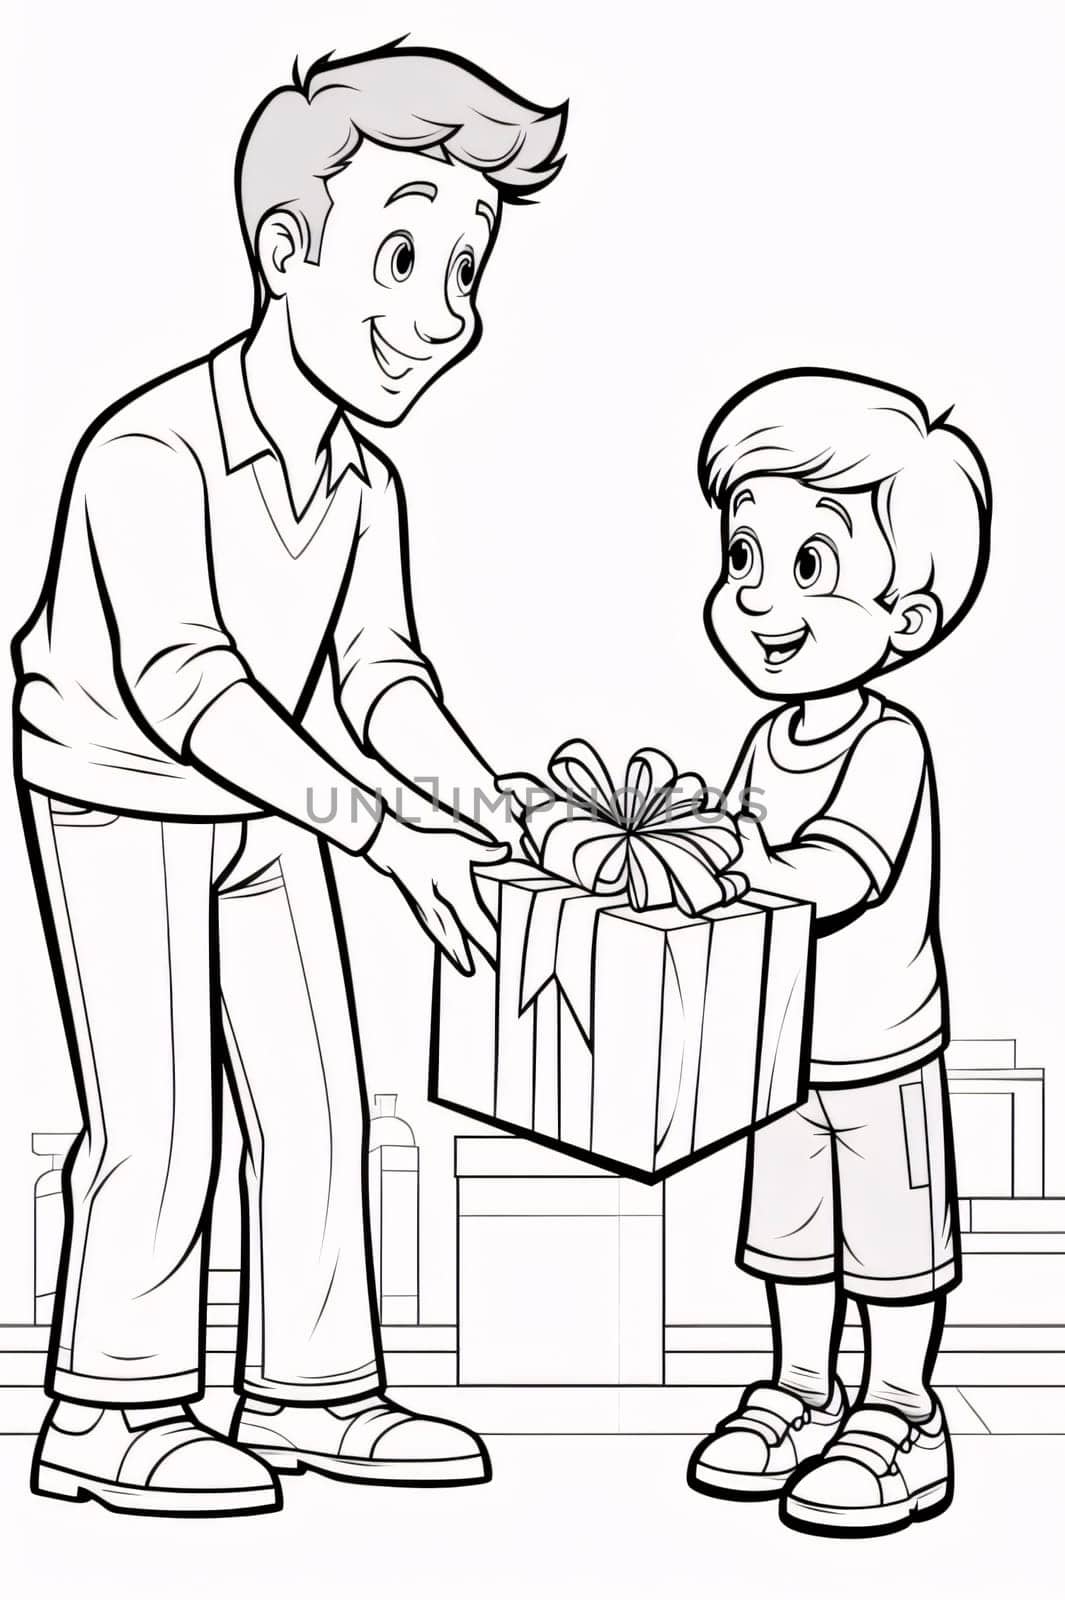 Black and White coloring card, father giving gift sons.Valentine's Day banner with space for your own content. Heart as a symbol of affection and love.